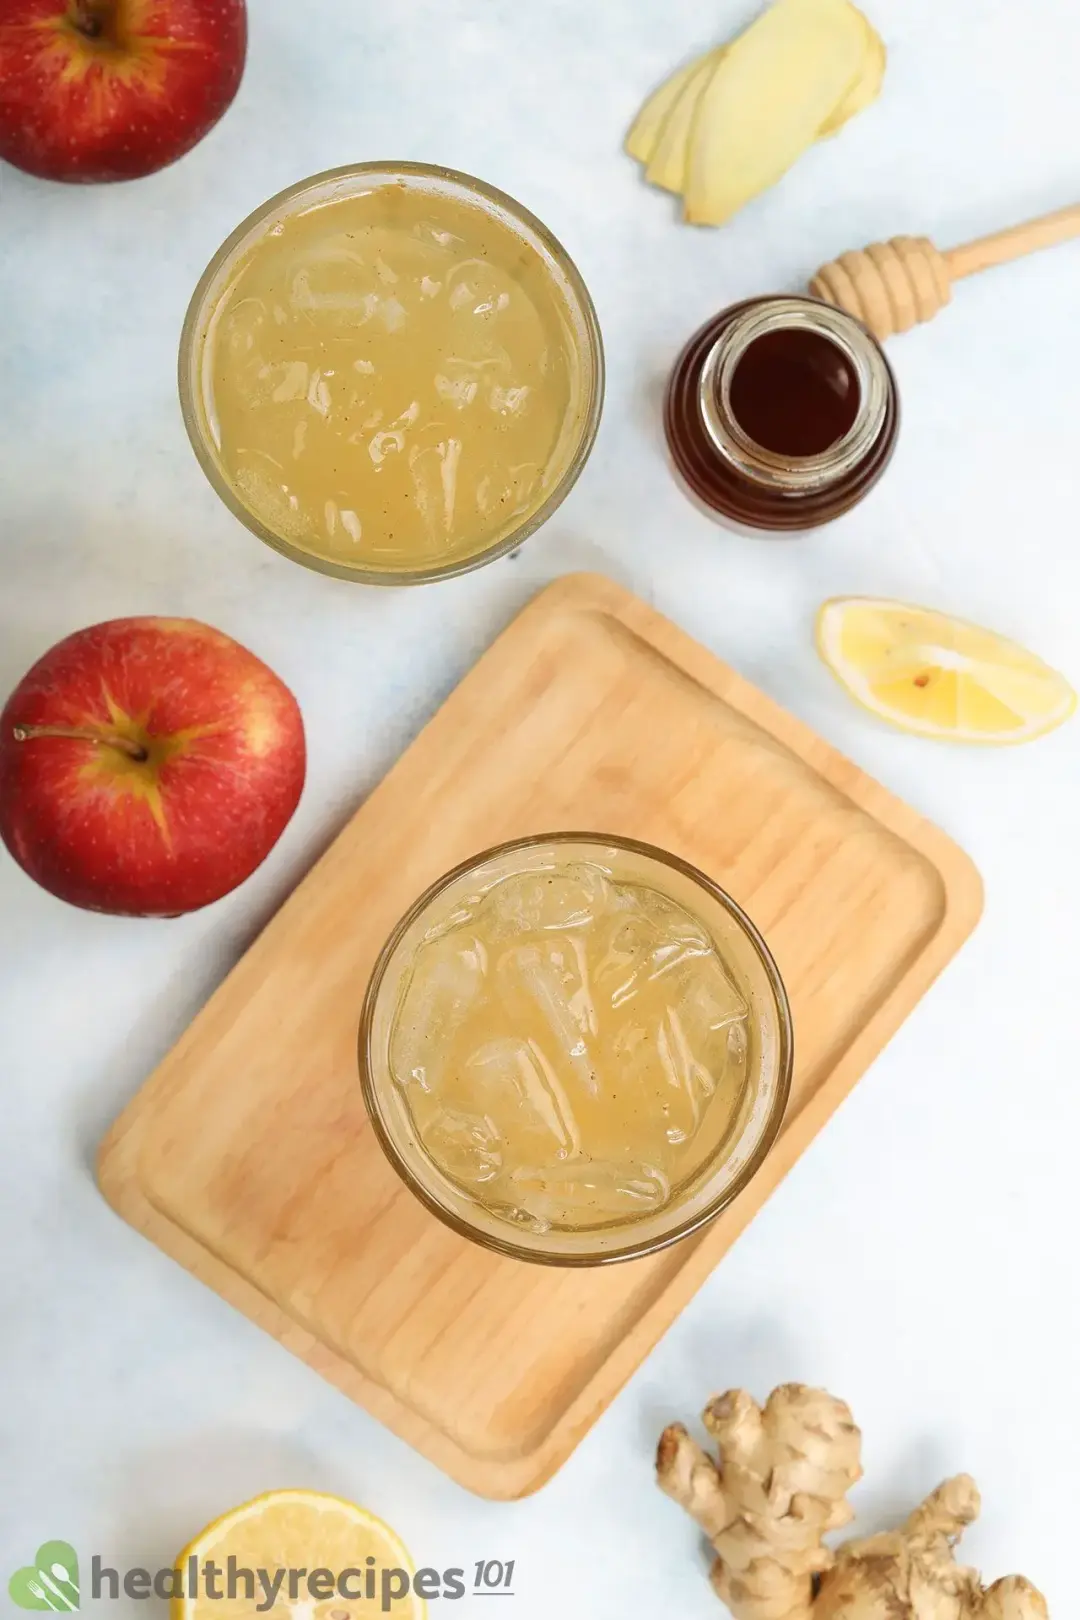 A shot taken from above: two iced glases of apple cider vinegar drinks on wooden tray next to apples, pineapples, ginger, and a honey jar